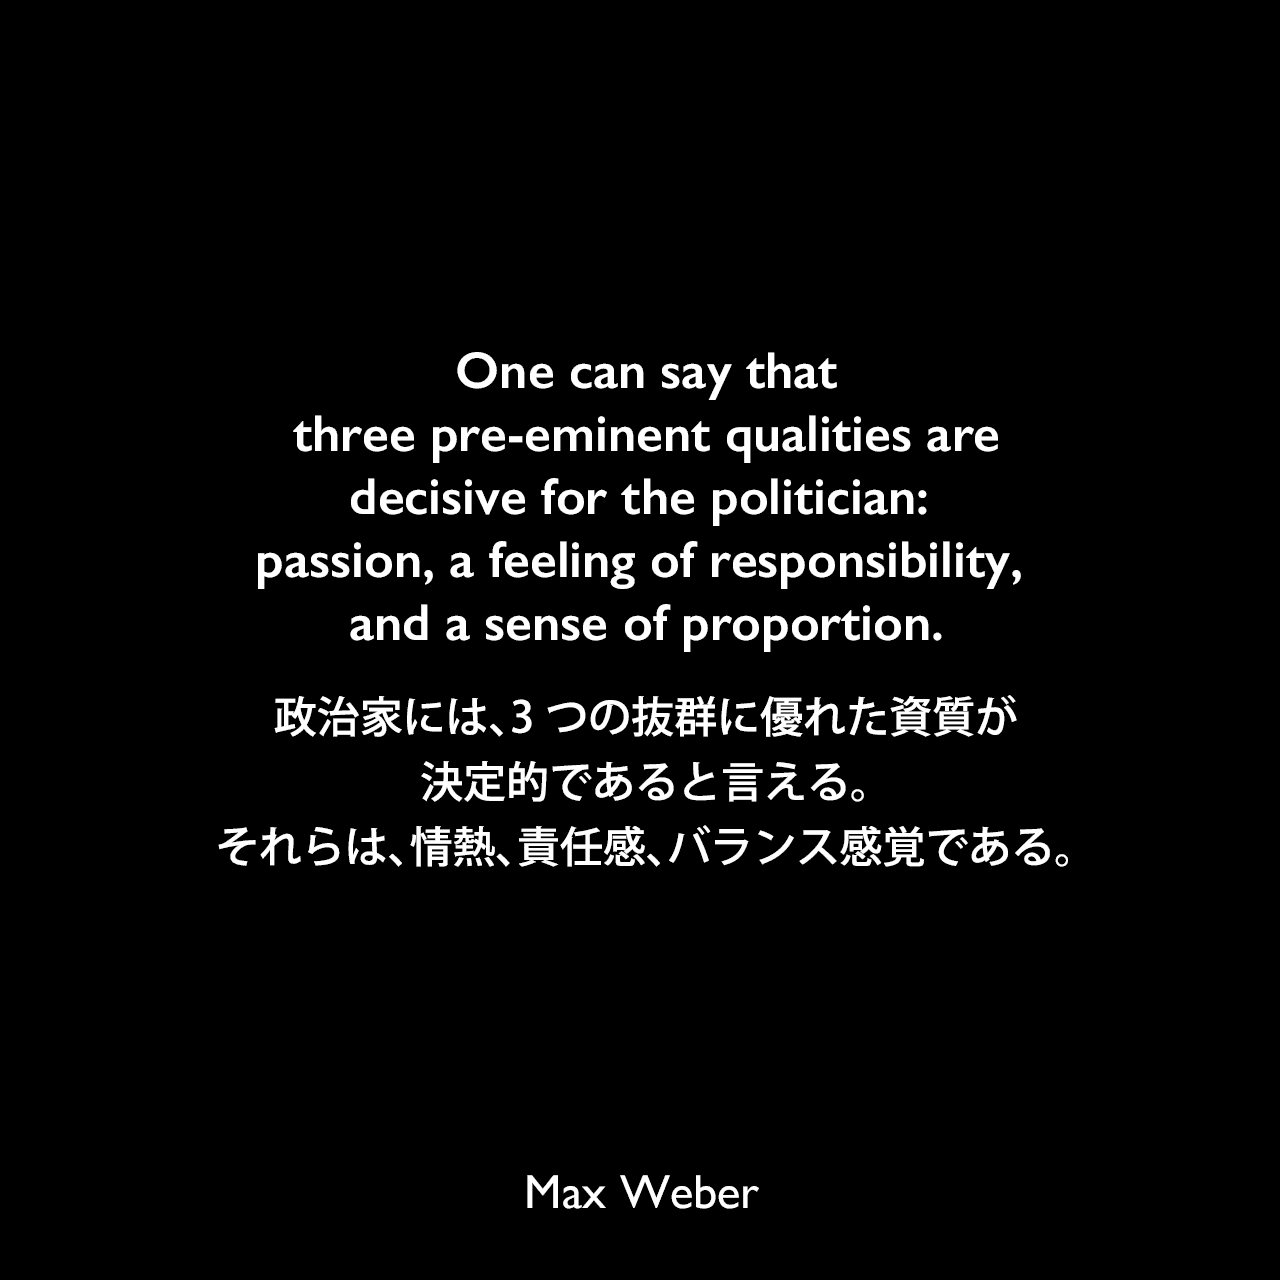 One can say that three pre-eminent qualities are decisive for the politician: passion, a feeling of responsibility, and a sense of proportion.政治家には、3つの抜群に優れた資質が決定的であると言える。それらは、情熱、責任感、バランス感覚である。Max Weber